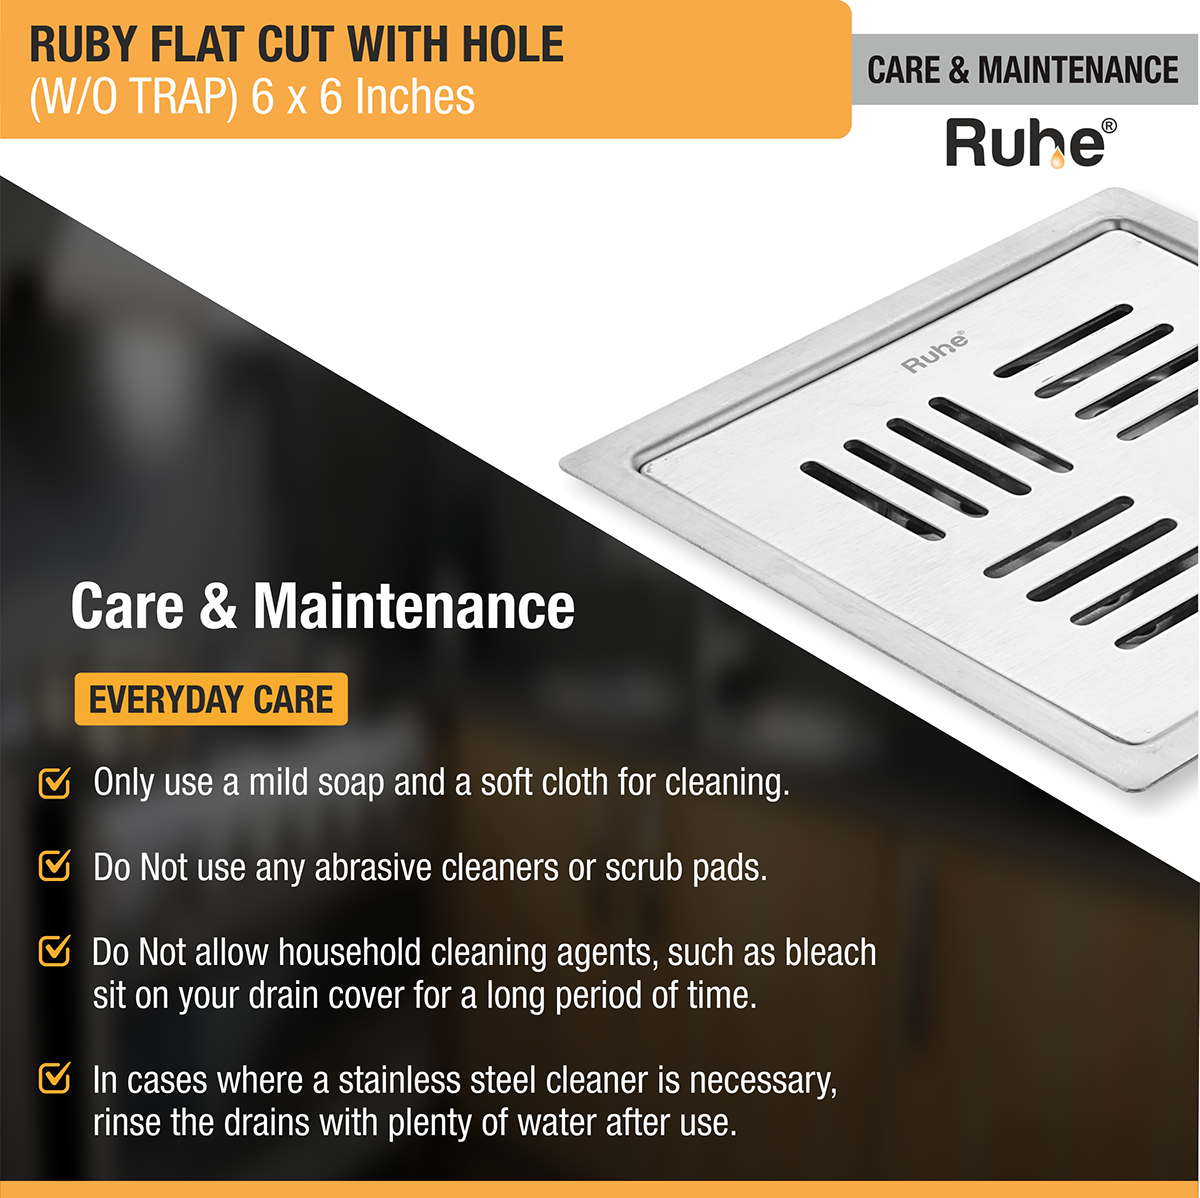 Ruby Square Flat Cut 304-Grade Floor Drain with Hole (6 x 6 Inches) care and maintenance